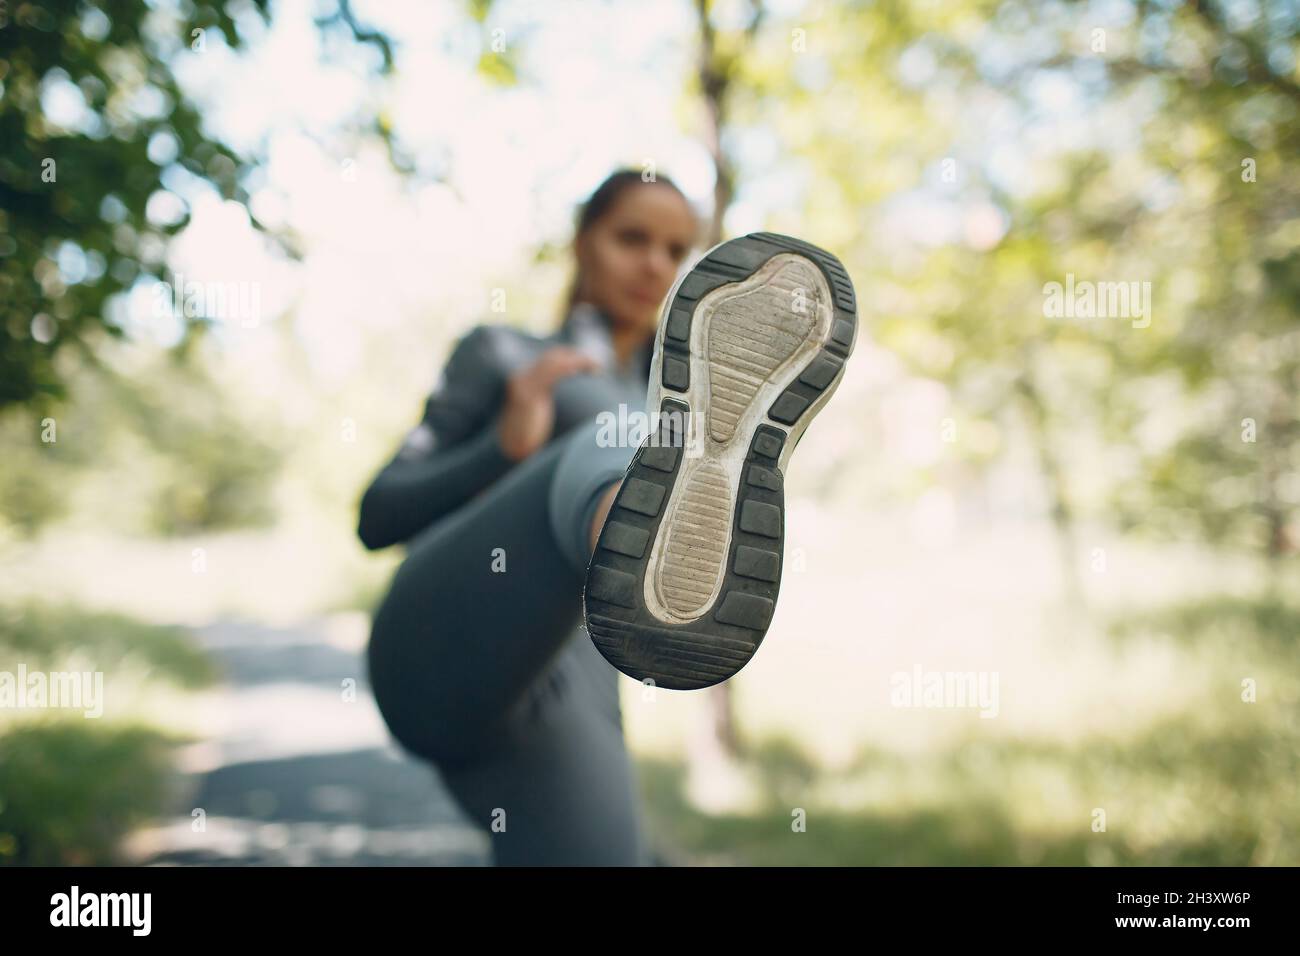 Girl kicking with her leg in camera, sole close up. Foreground focus. Stock Photo